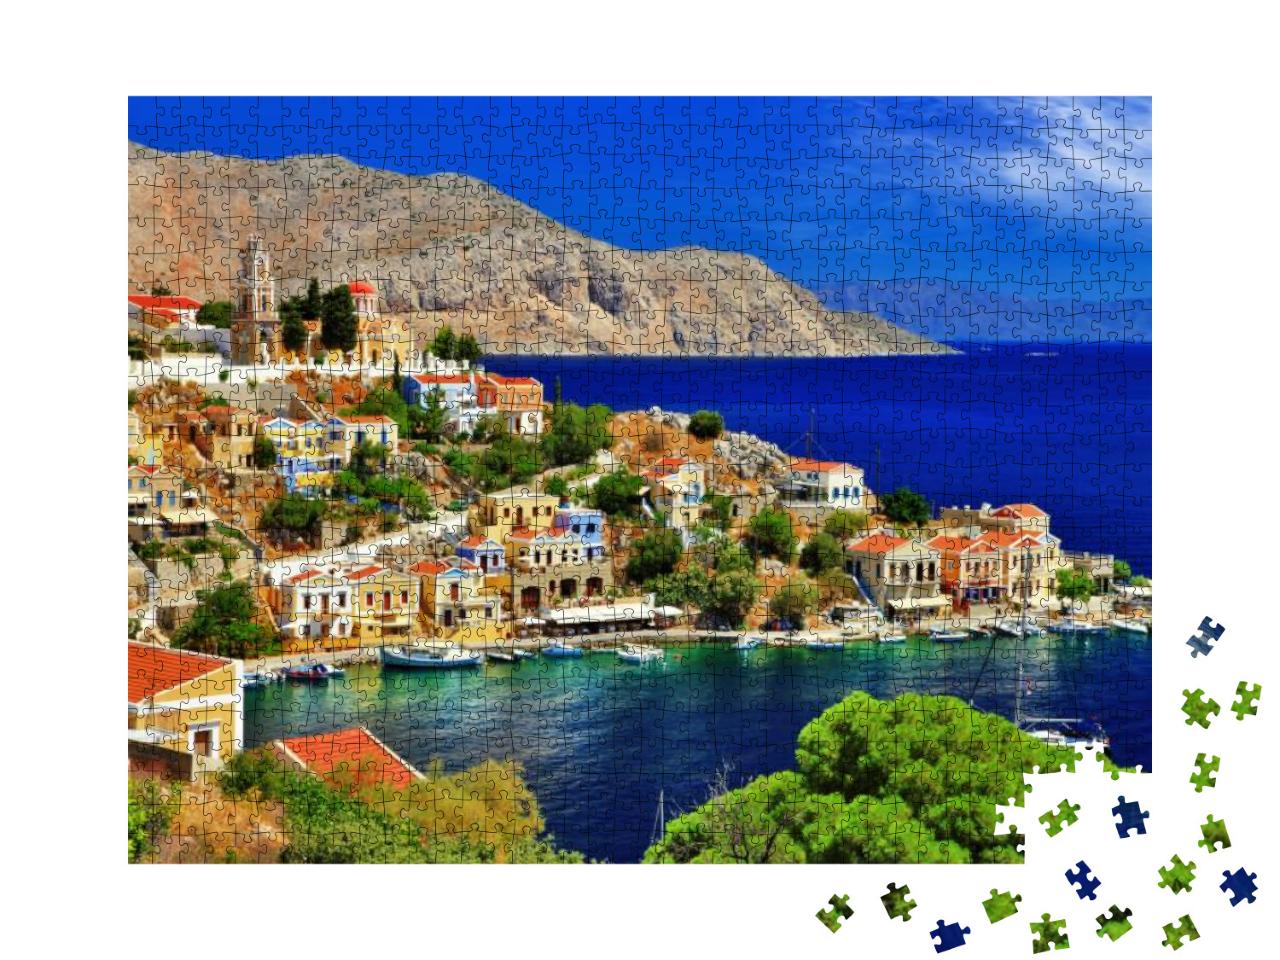 Puzzle 1000 Teile „Wunderbares Griechenland: Insel Symi, Dodekanes“